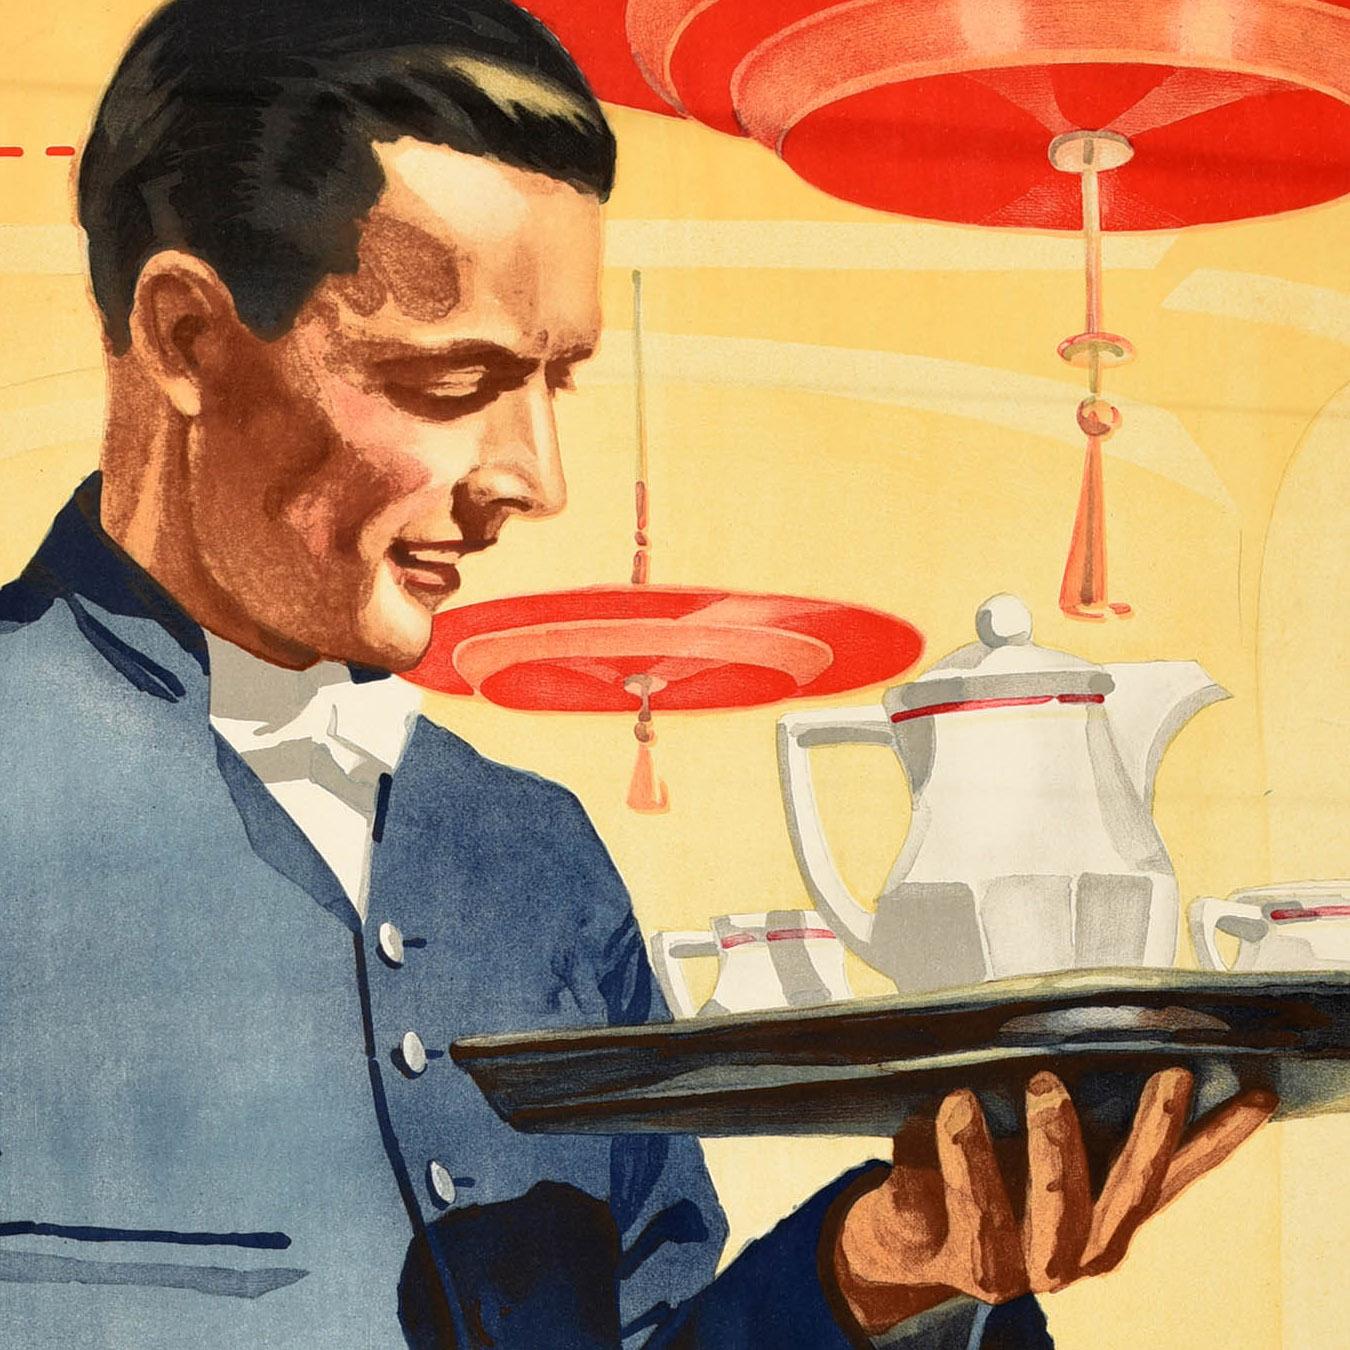 Original Antique Advertising Poster Maximilian Cafe Restaurant Afternoon Tea Art - Print by Unknown